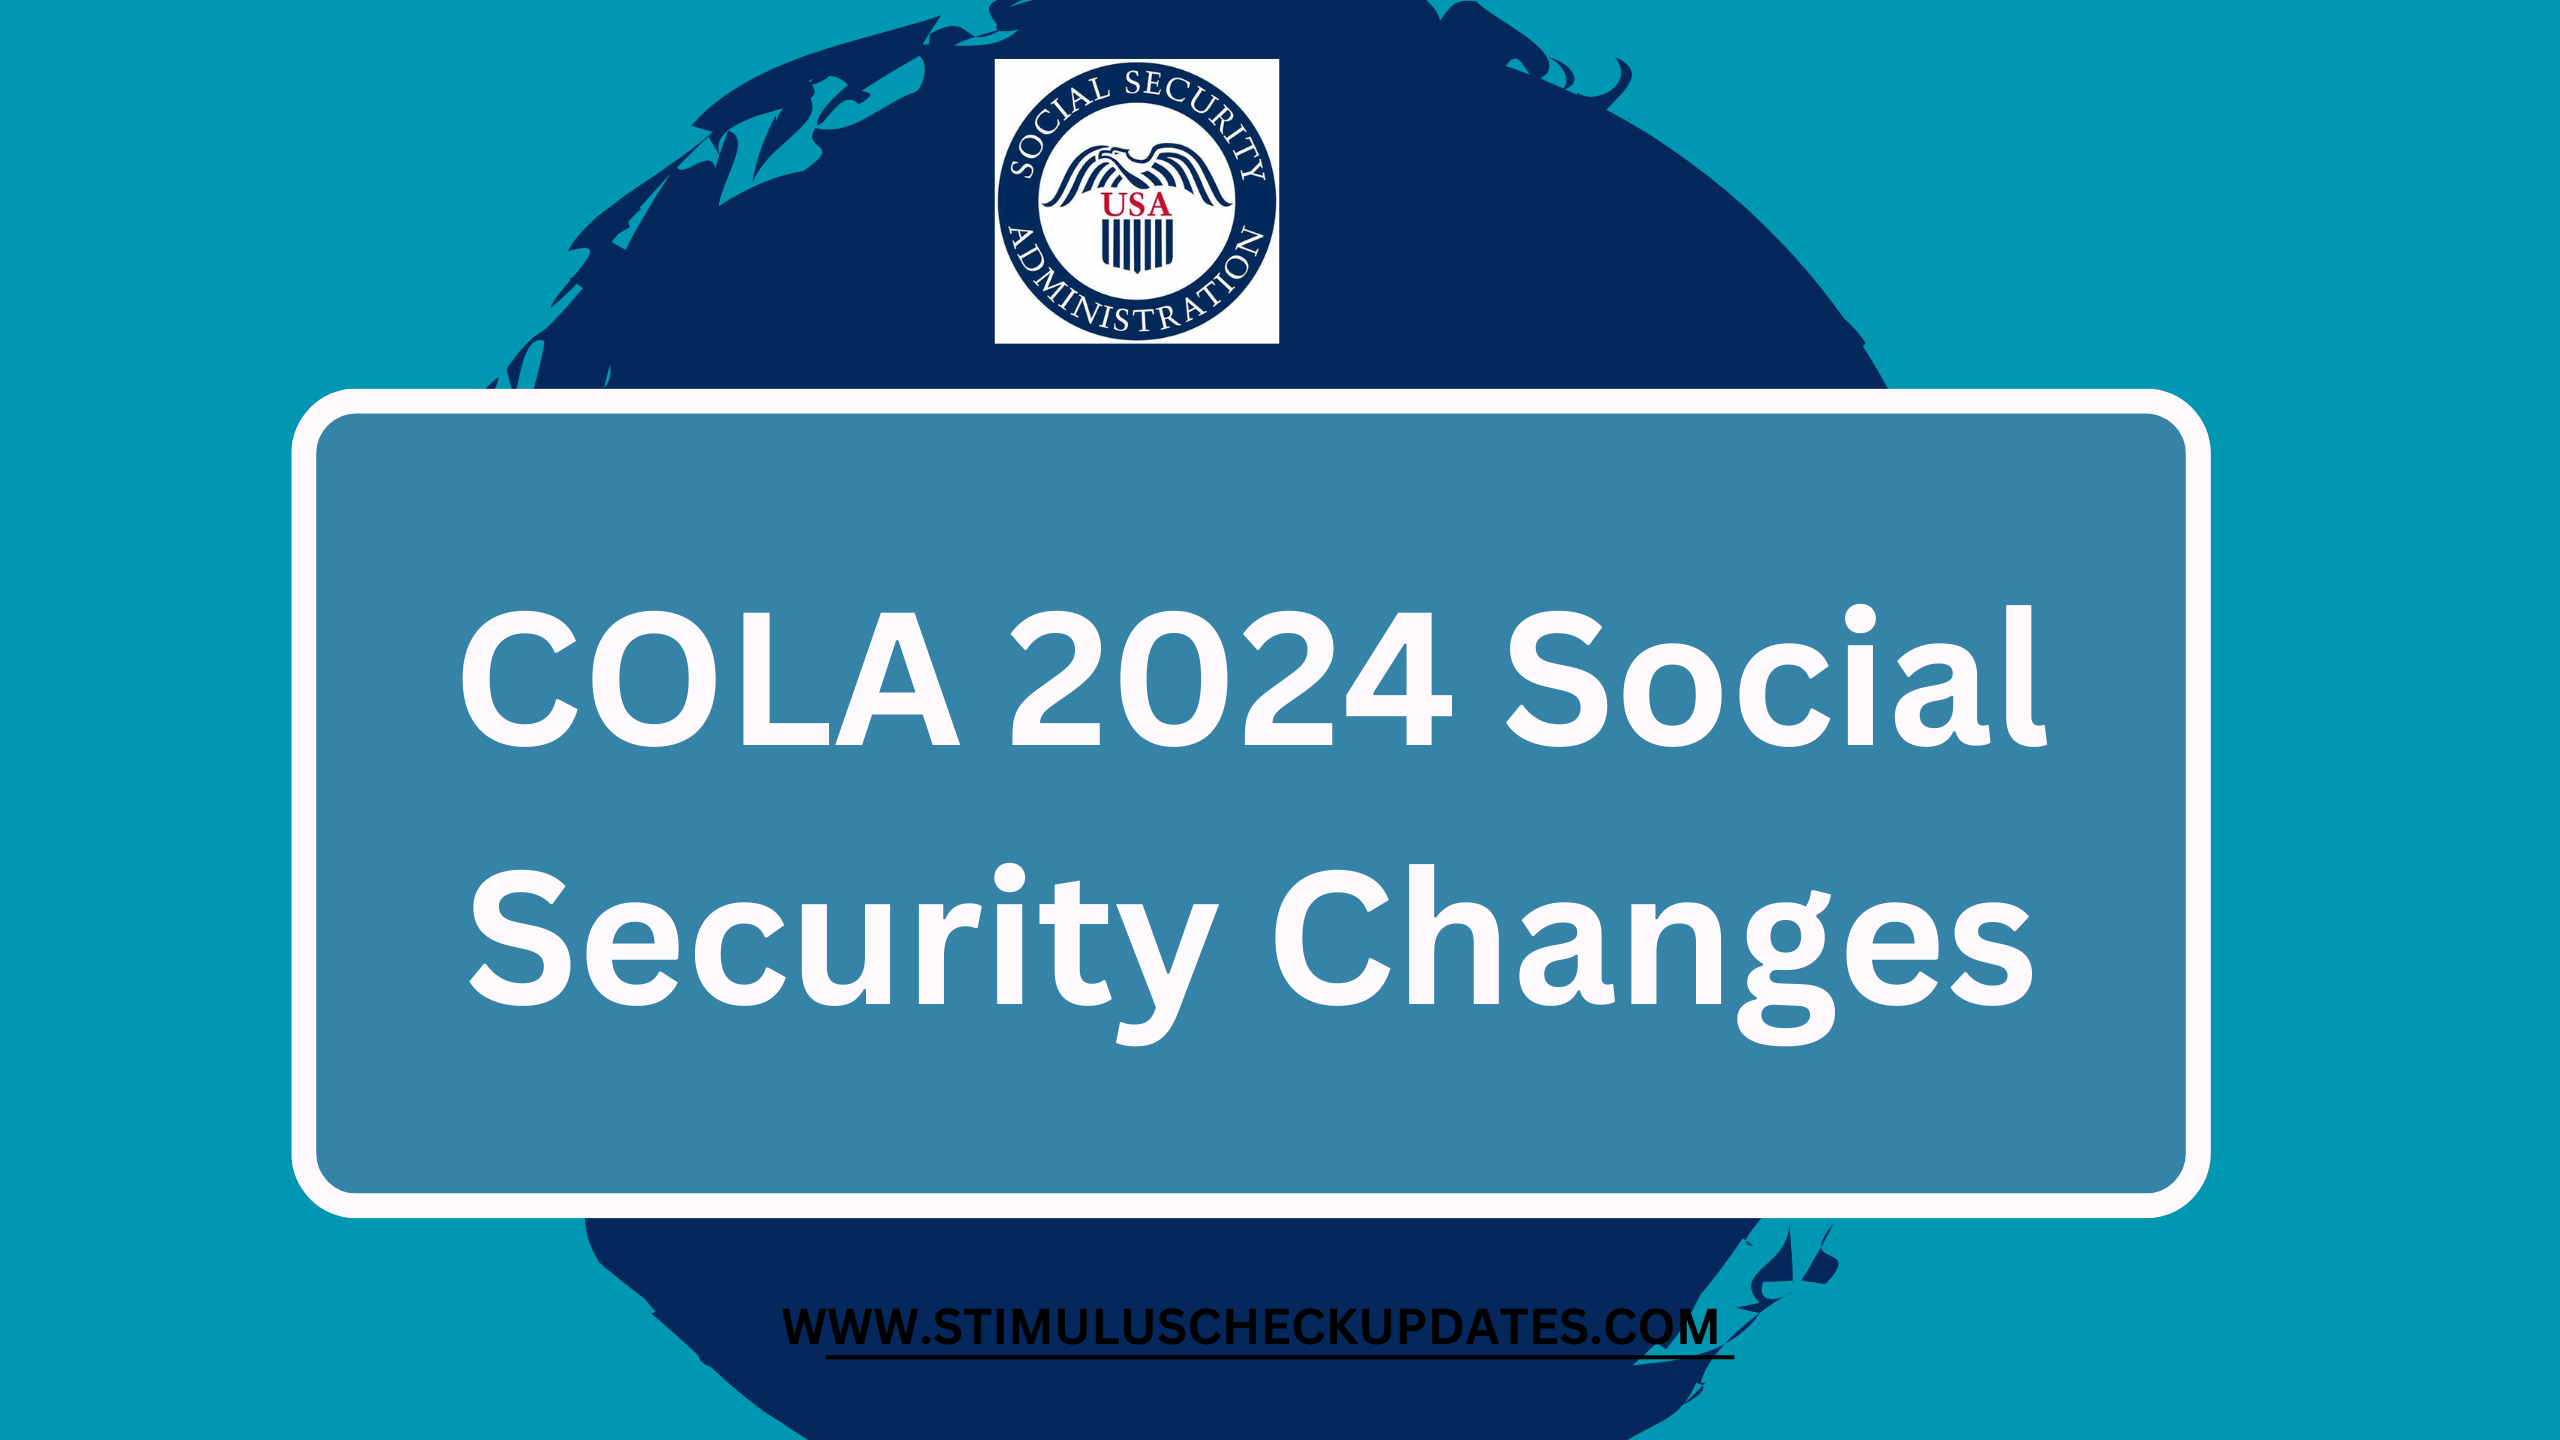 COLA 2024 Social Security Changes